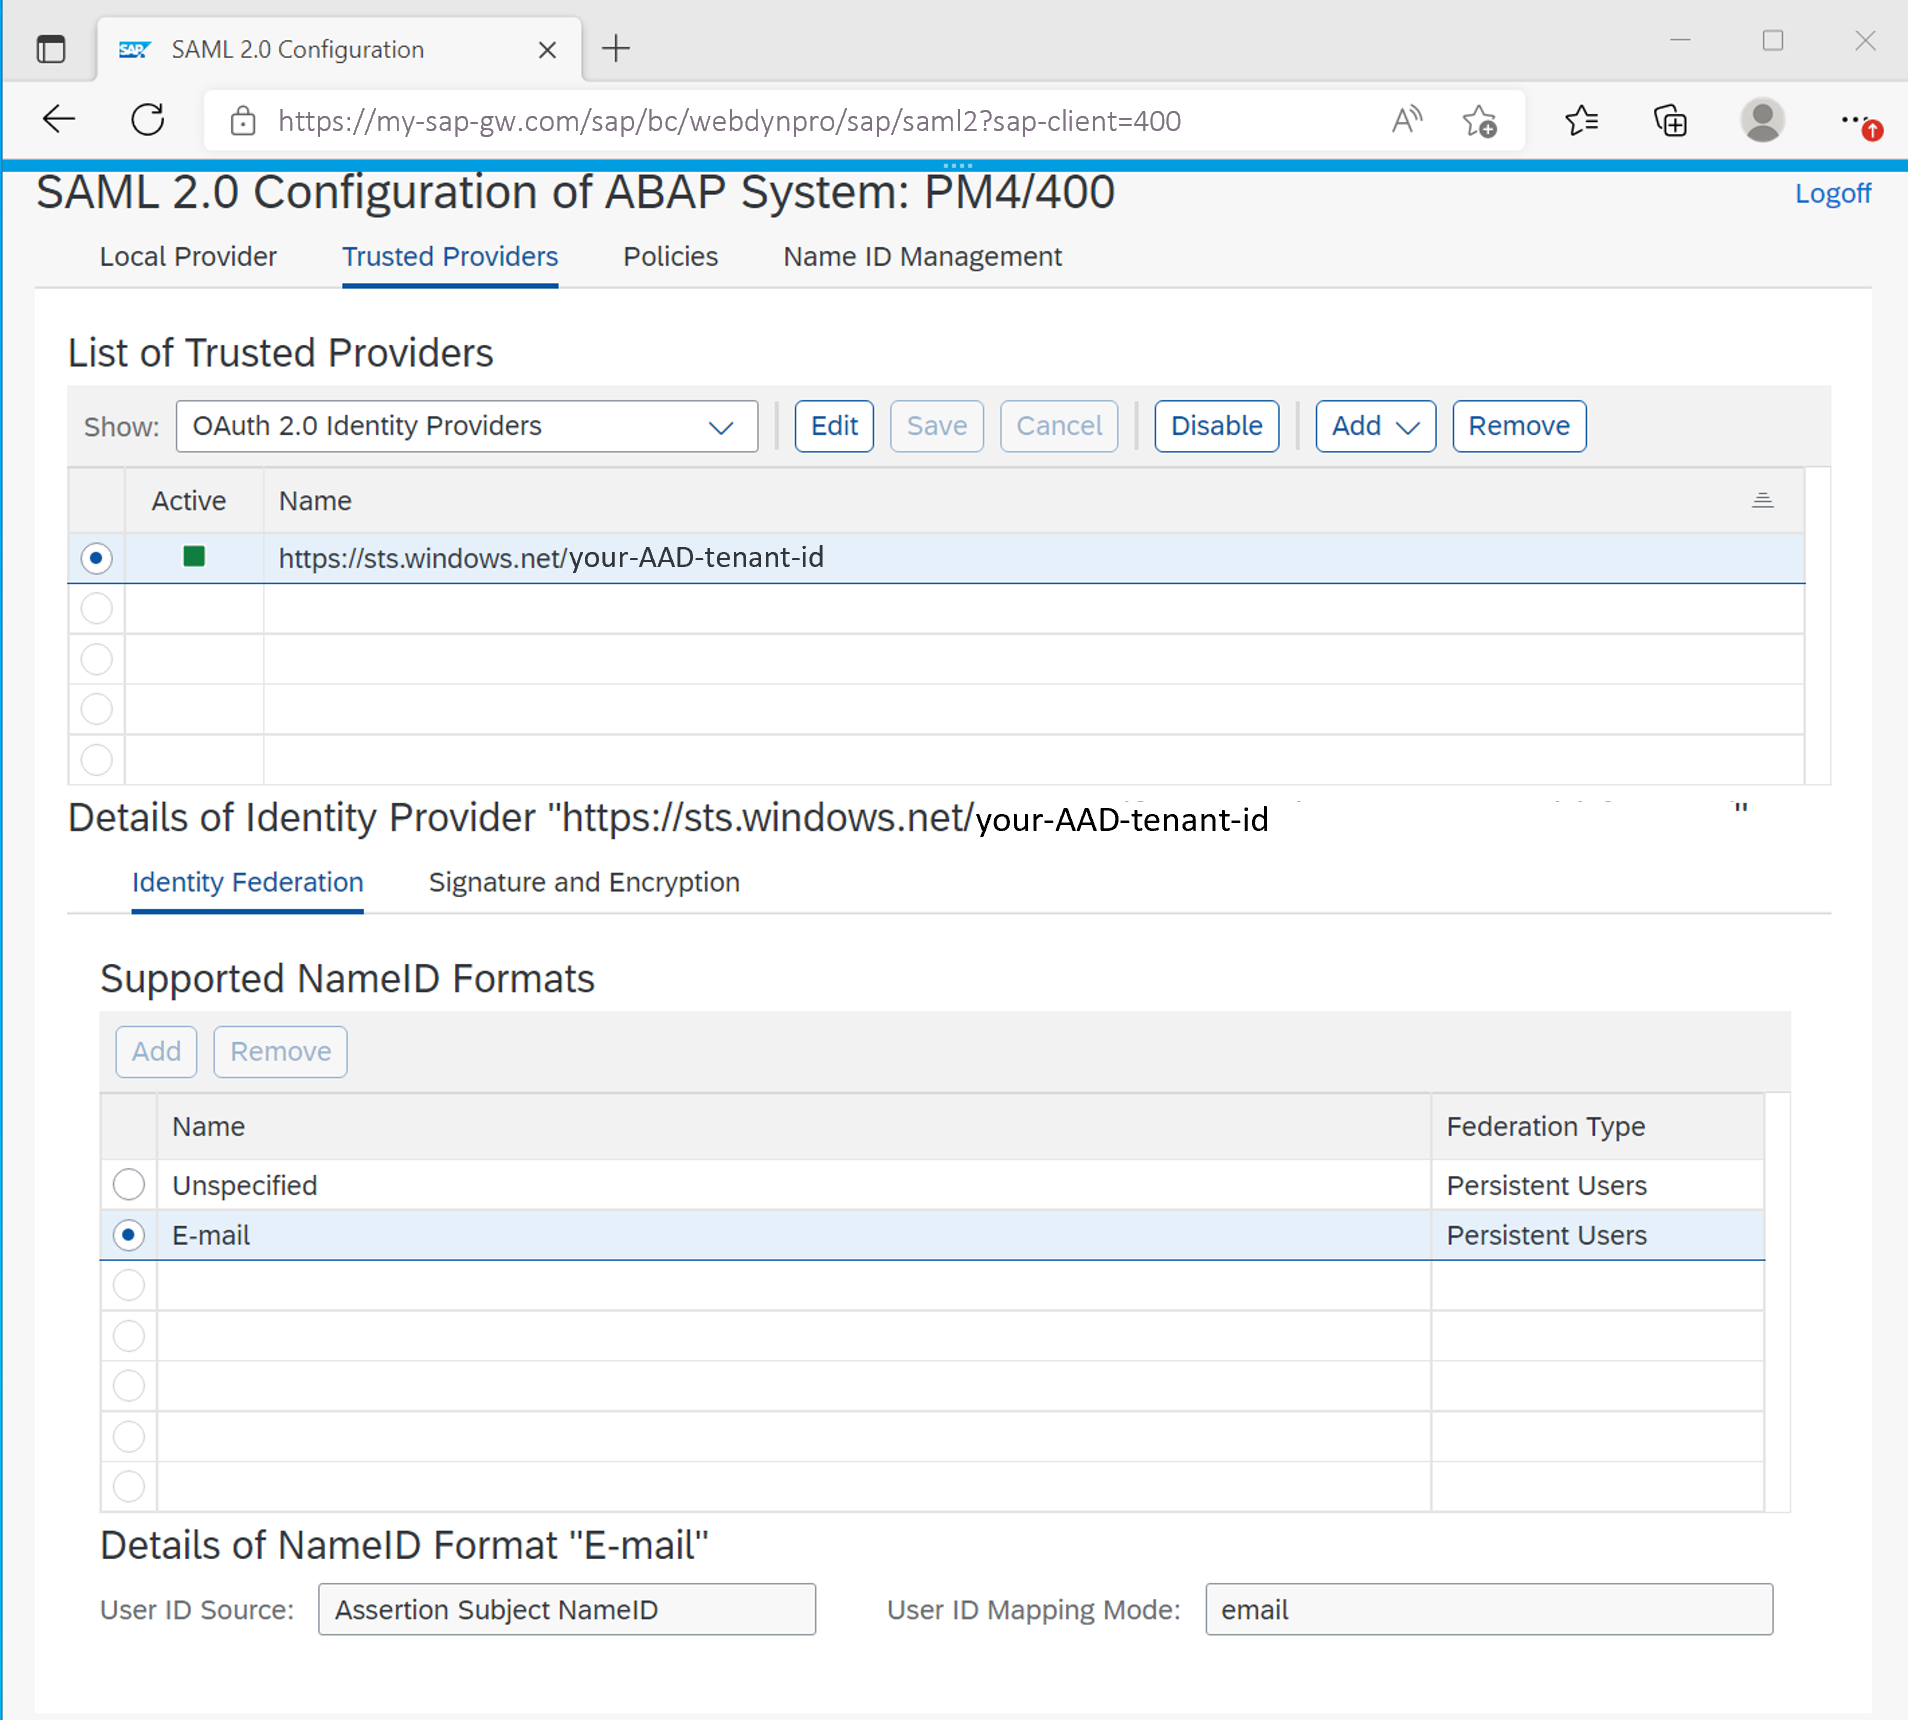 Screenshot that shows the email mapping mode in SAP SAML2 transaction.